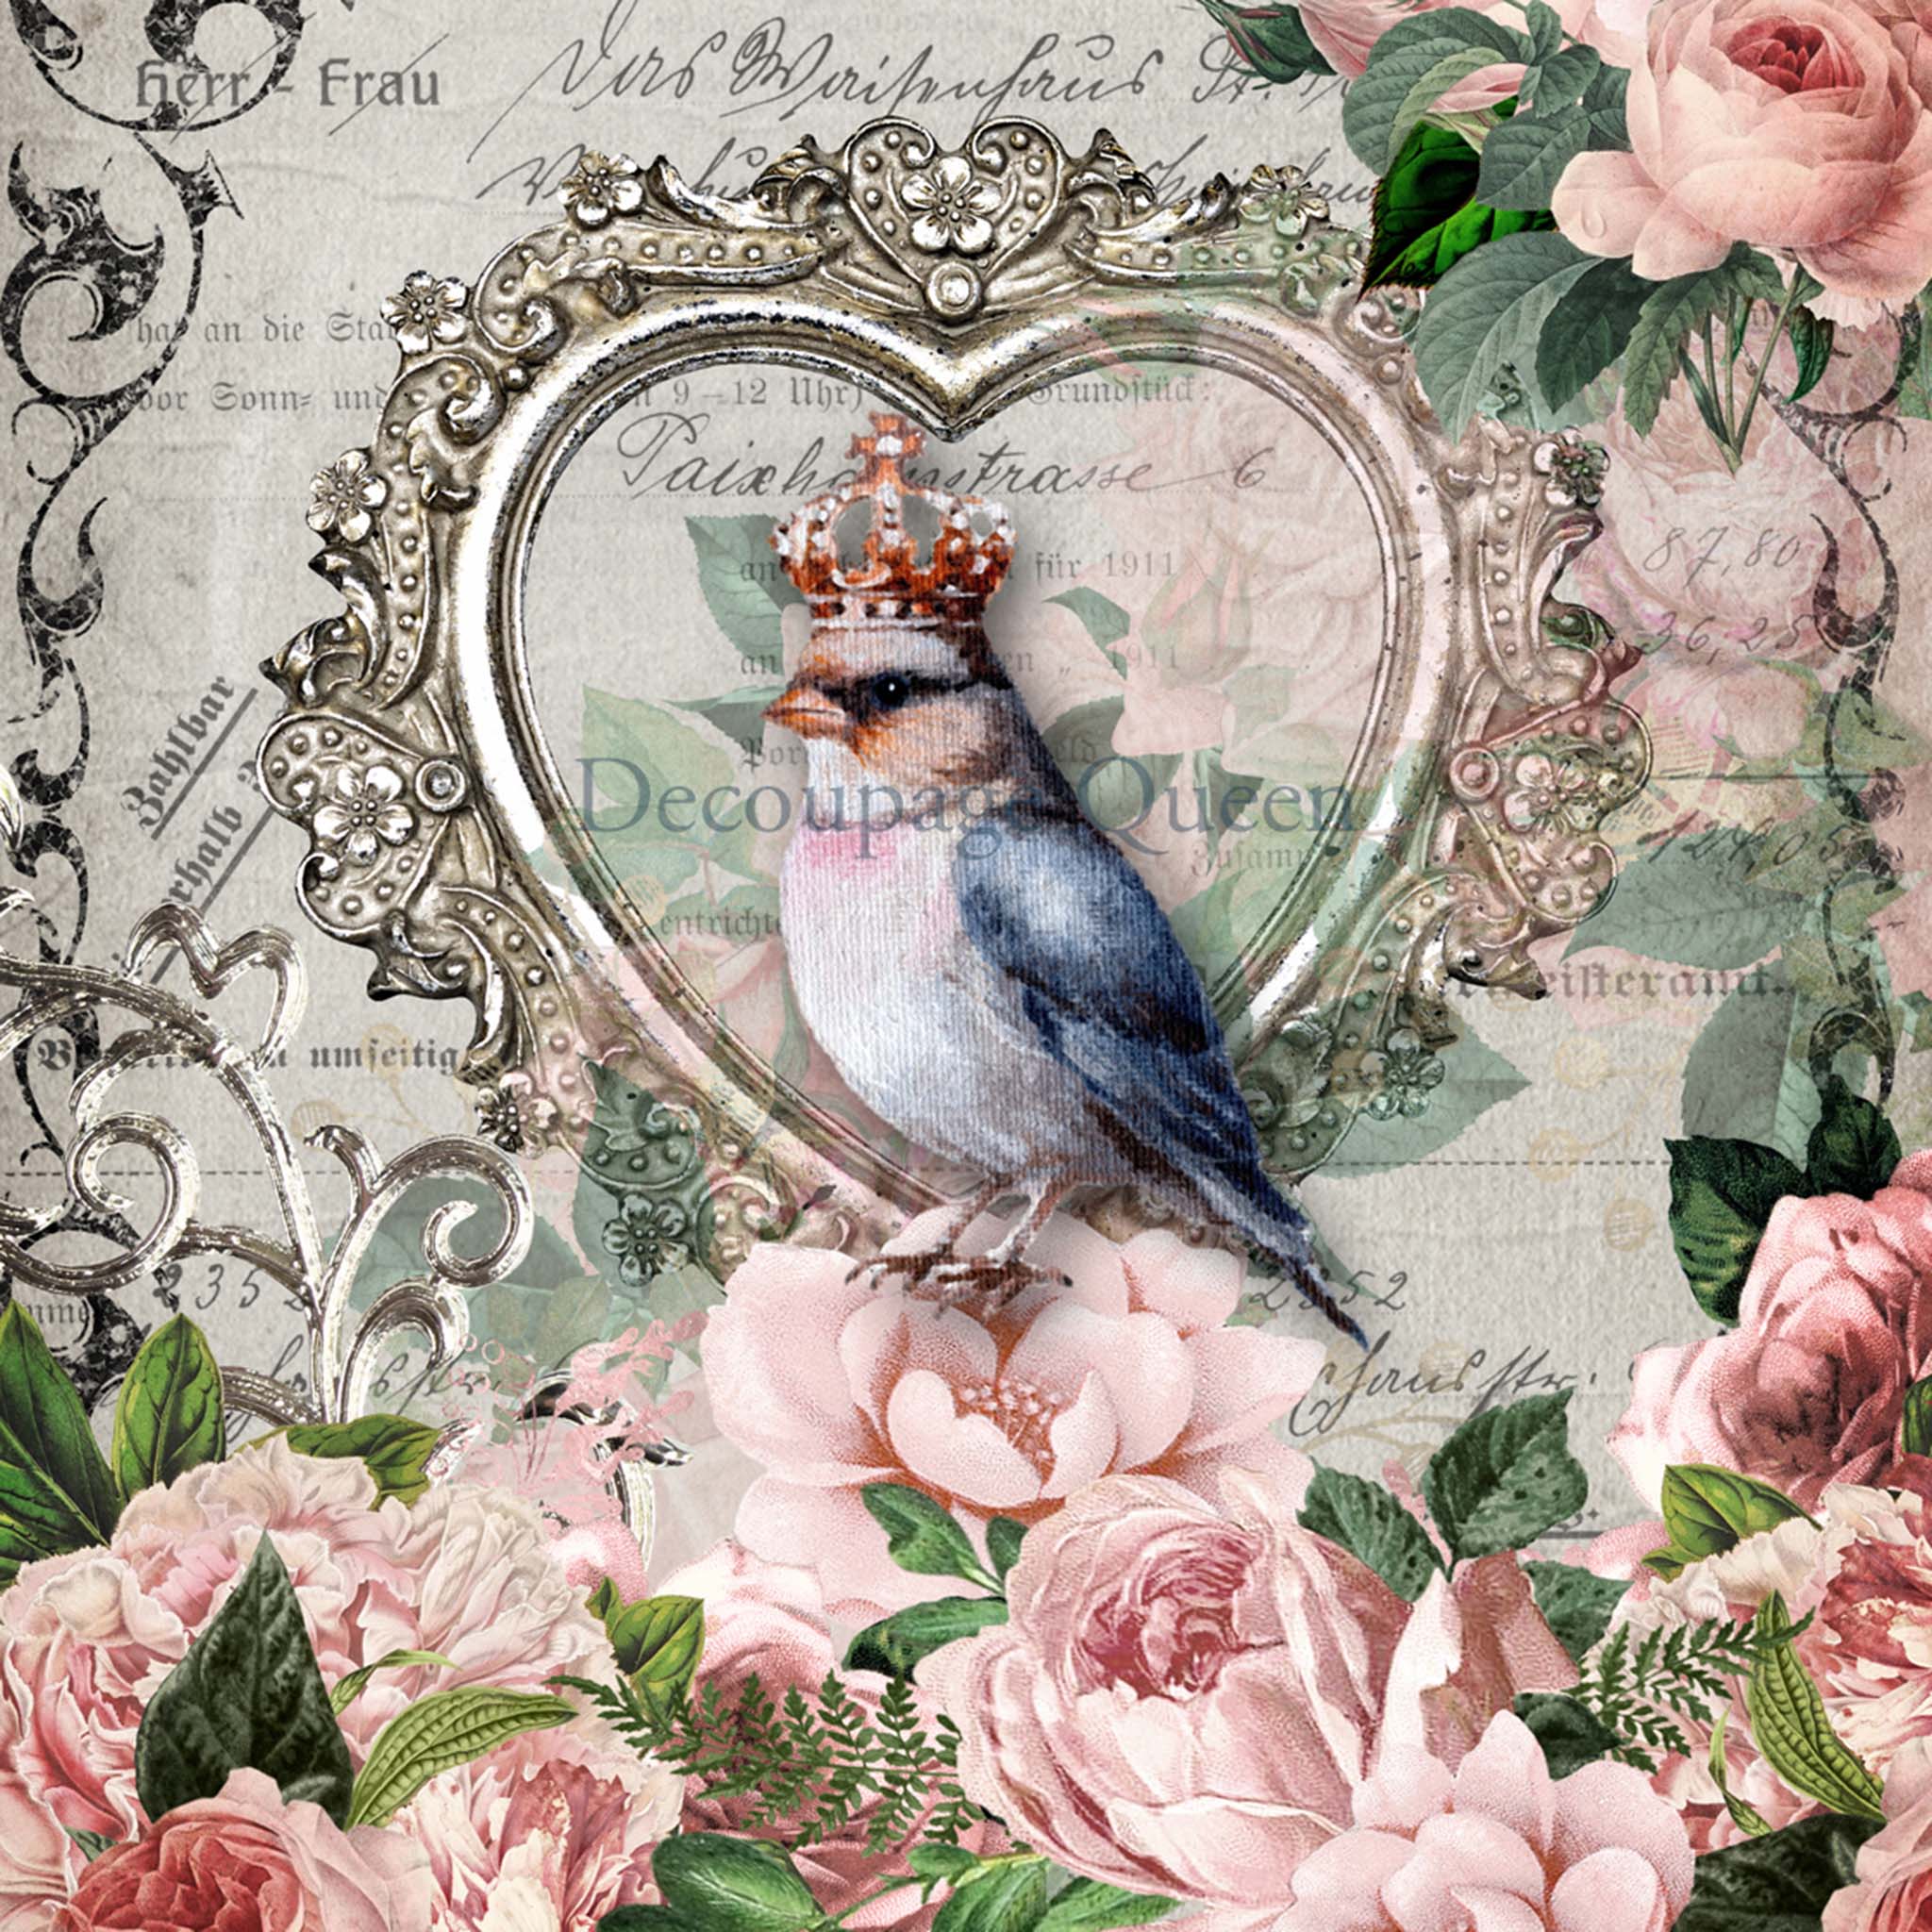 A4 rice paper design that features delicate pink roses, a charming bluebird wearing a crown while sitting in a heart picture frame, and a vintage French document.